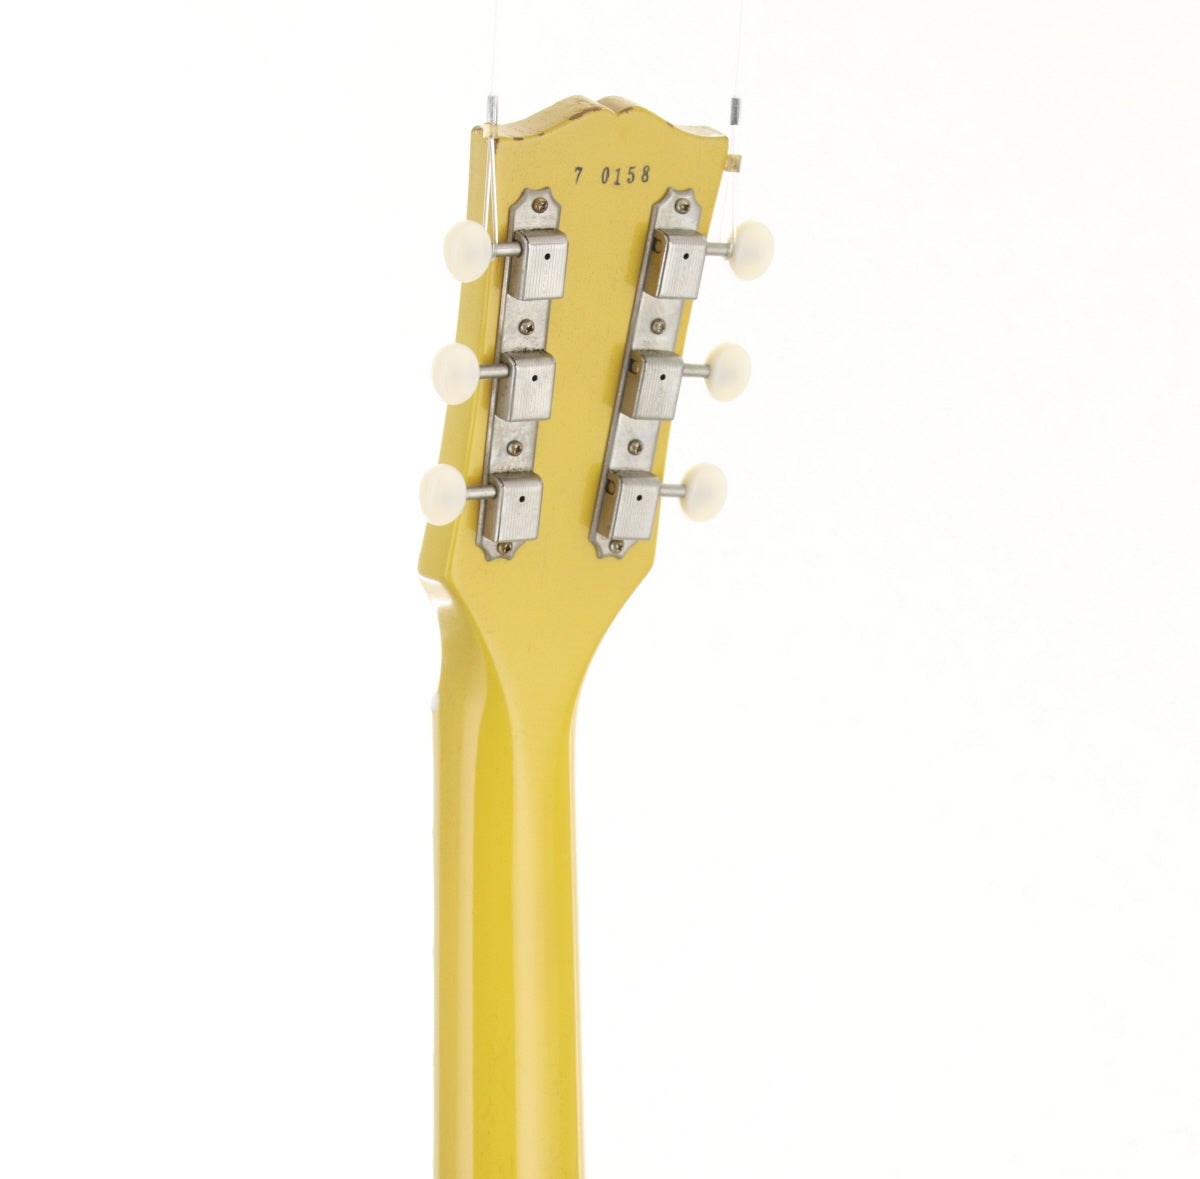 [SN 7 0158] USED Gibson Custom Shop / 1957 Les Paul Special SC Bright TV Yellow [03]